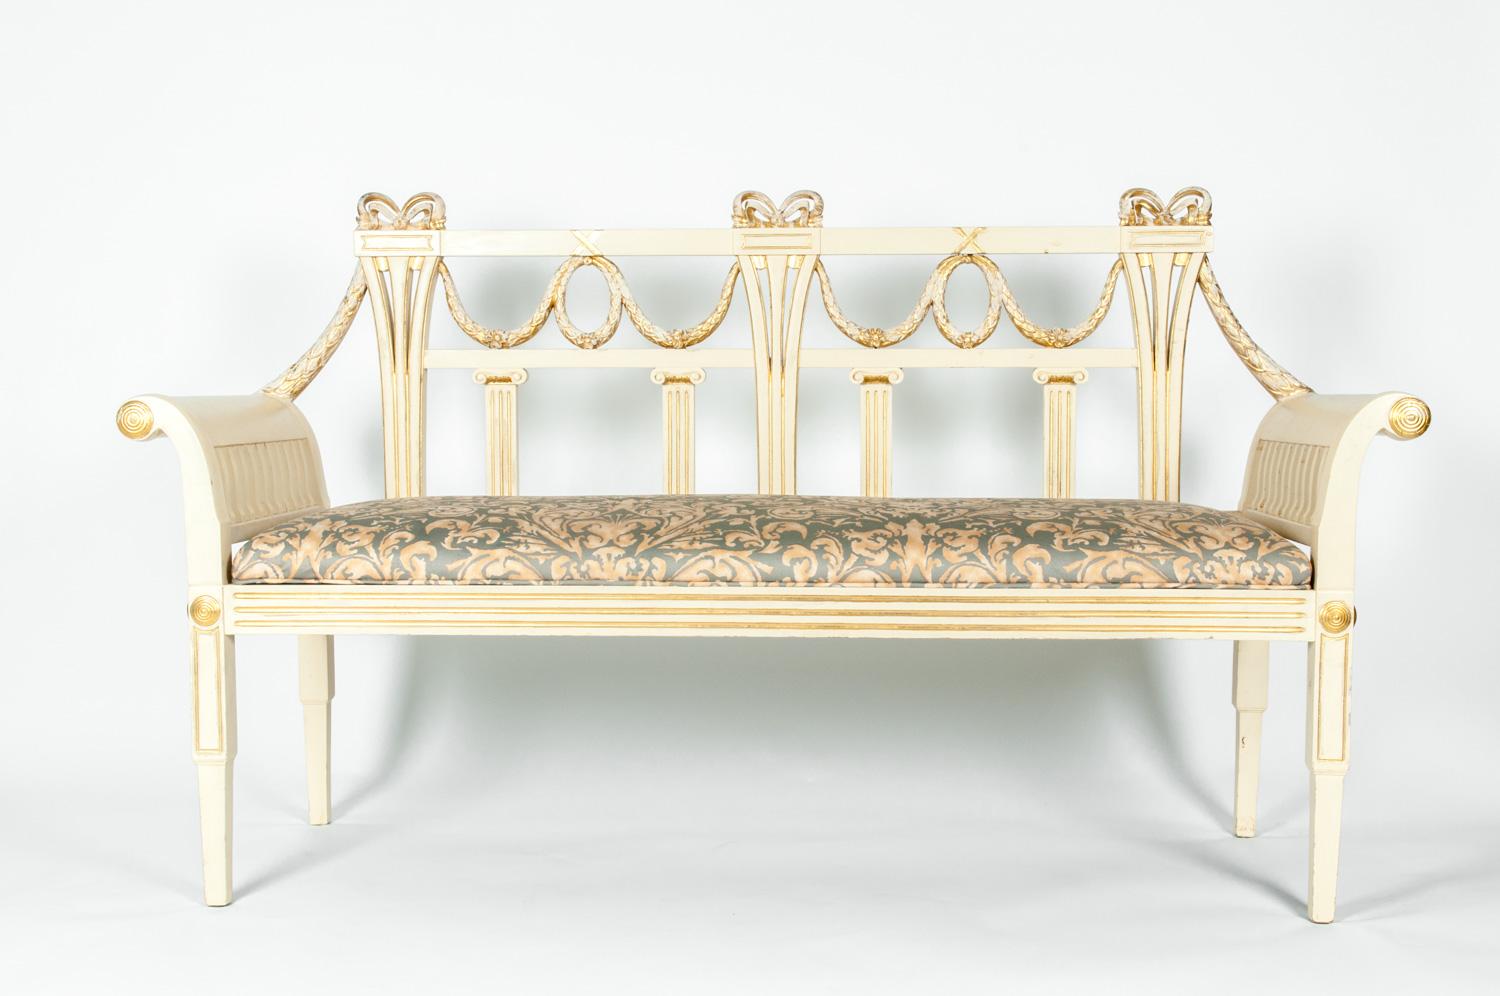 Vintage neoclassical style French settee or bench. This neoclassical style settee / bench was made in France with intricate Empire style wreath design and bow, fluted top column detail accented with gold leaf. The settee / bench measure about 58